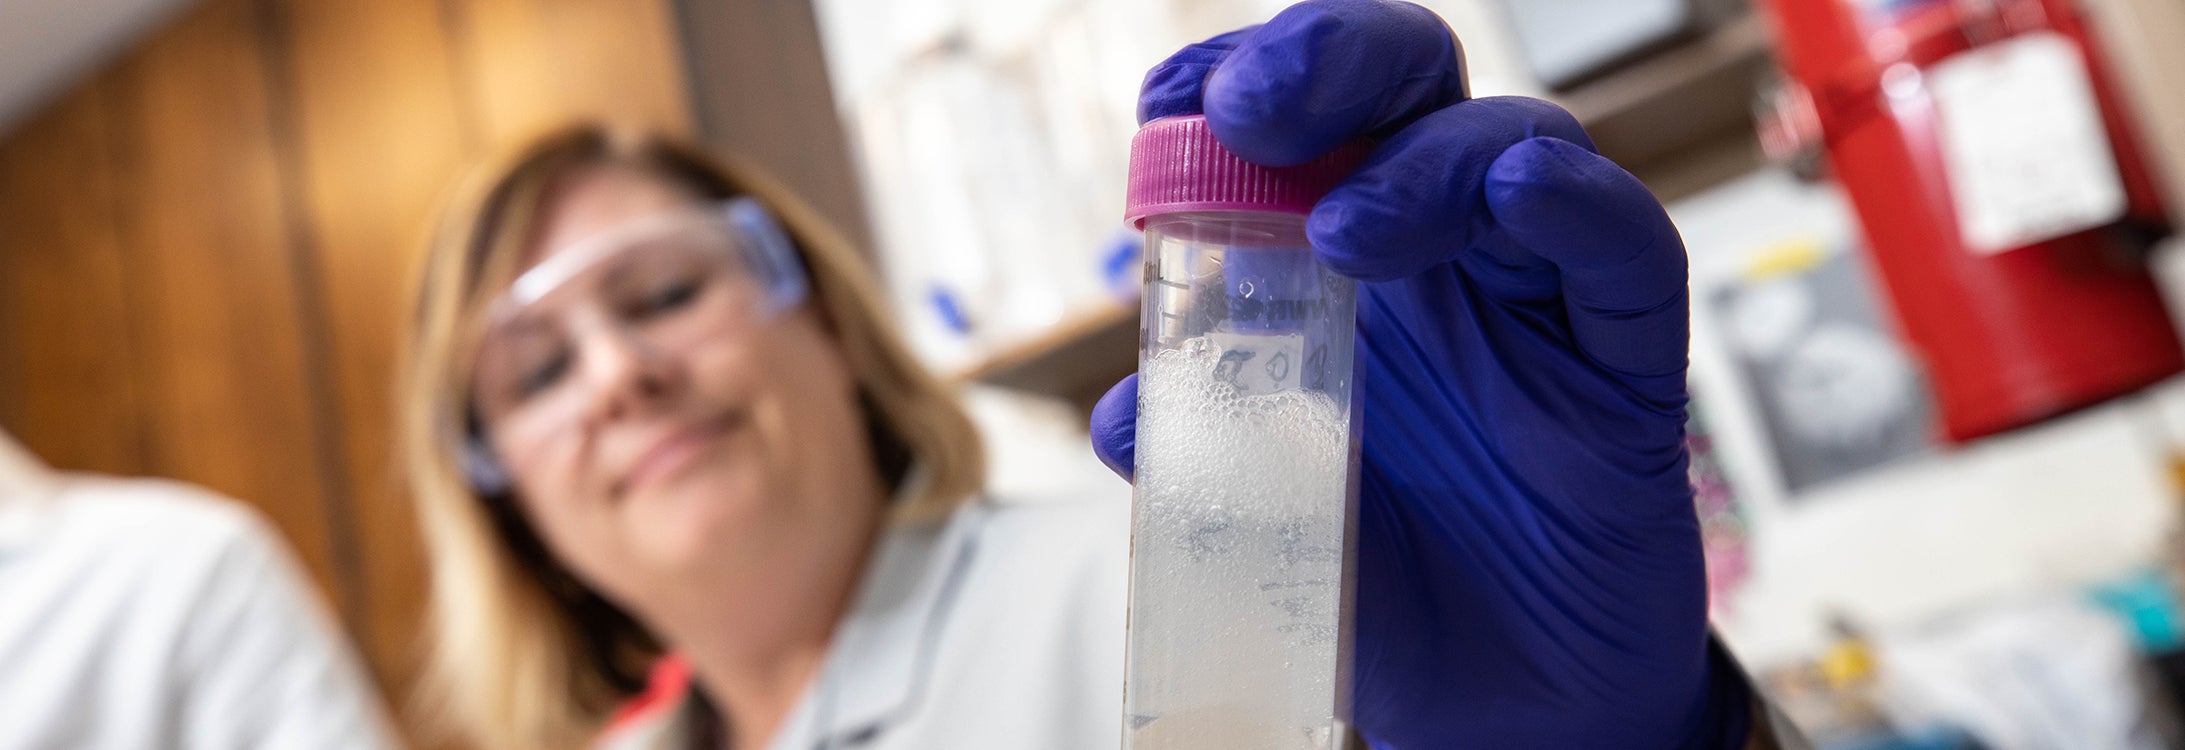 ECU associate professor Jamie DeWitt examines a sample of water in her lab at the Brody School of Medicine. Many faculty researchers, including DeWitt, have seen their labs shut down because of sheltering guidelines due to COVID-19. (Photo by Cliff Hollis)